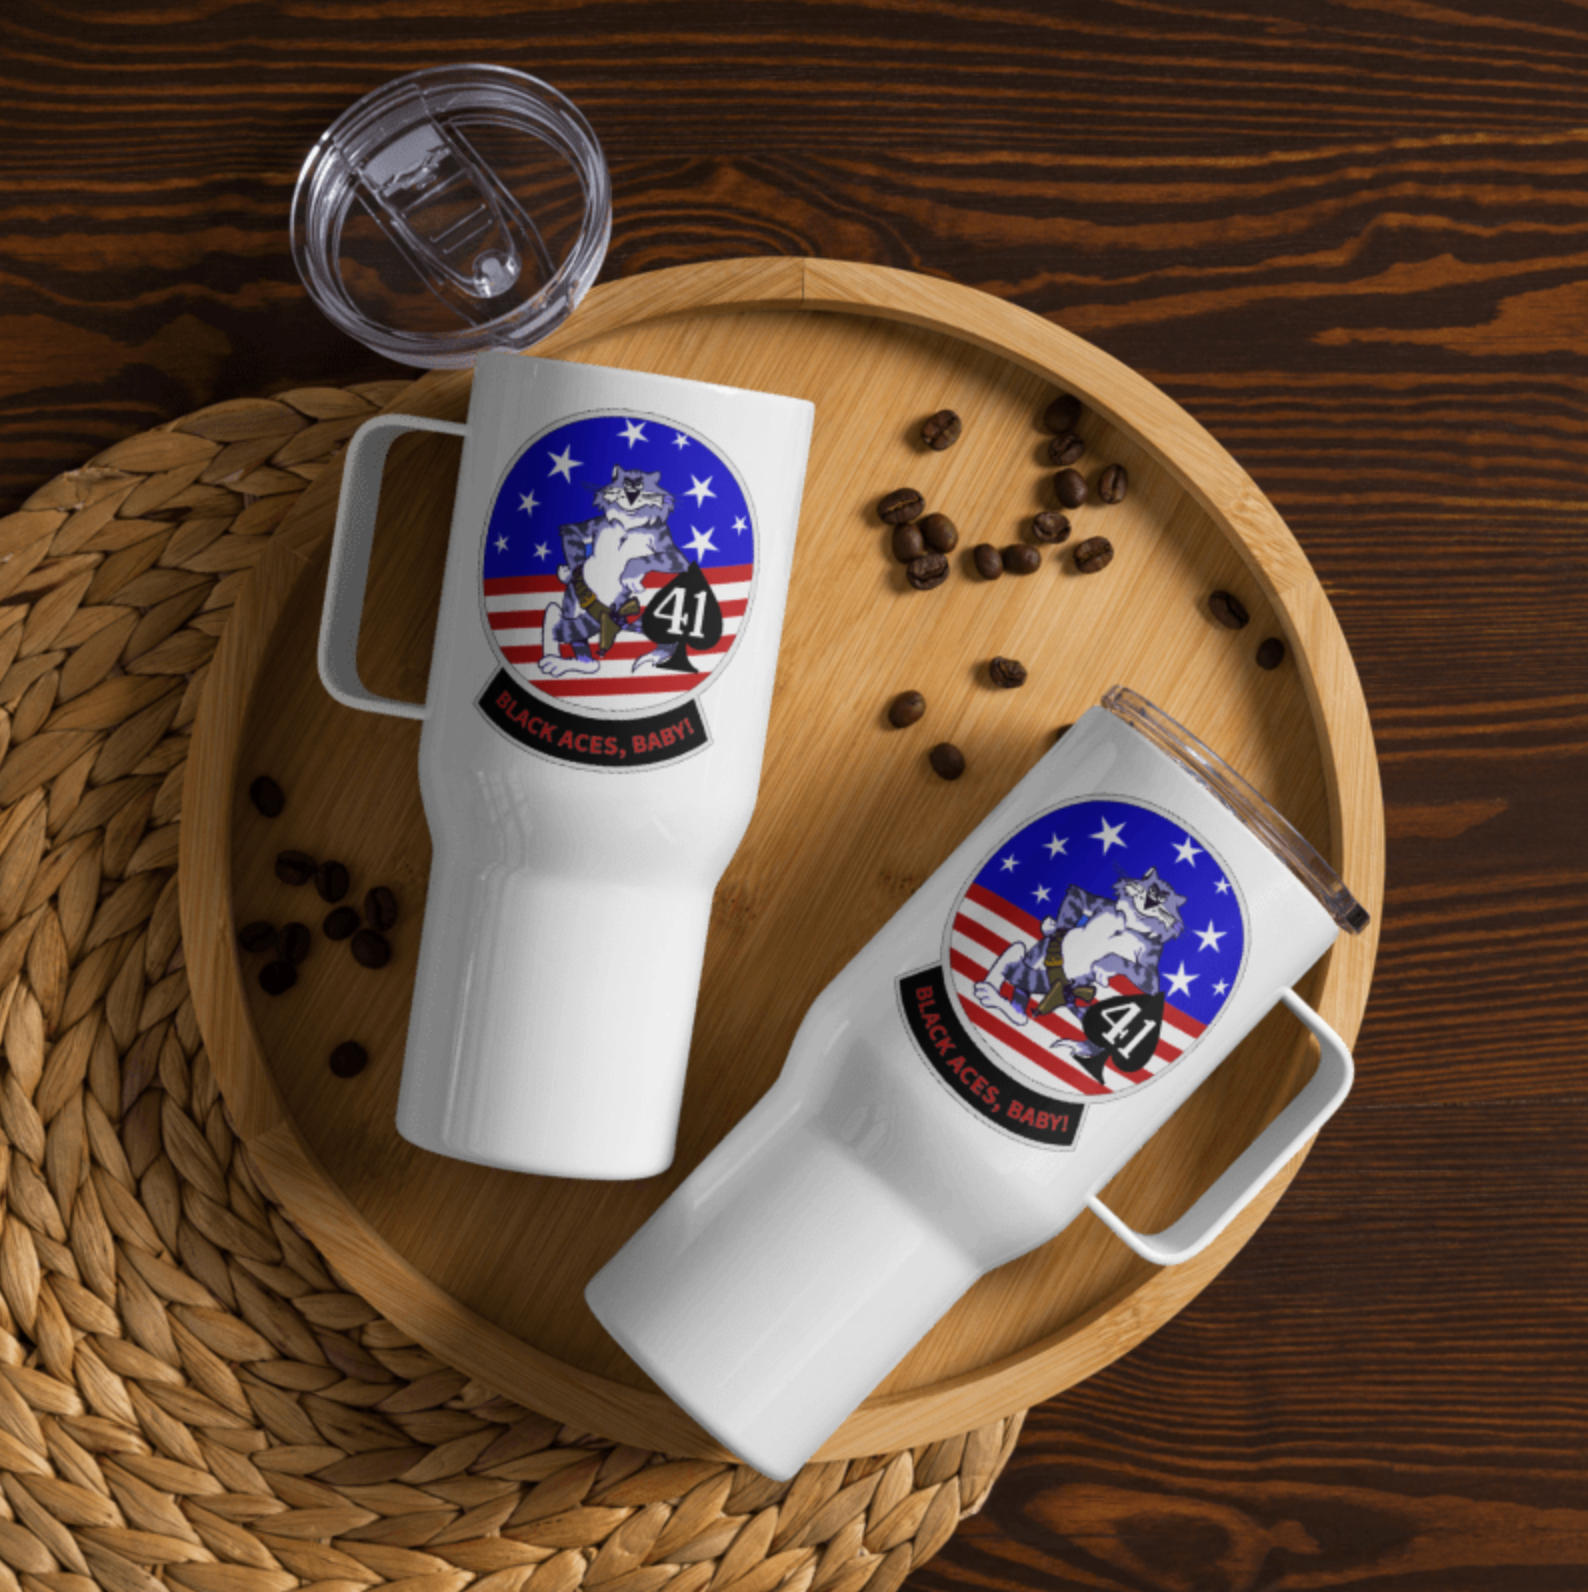 Black Aces, Baby - Tomcat Travel mug with a handle – Top Gun Fans